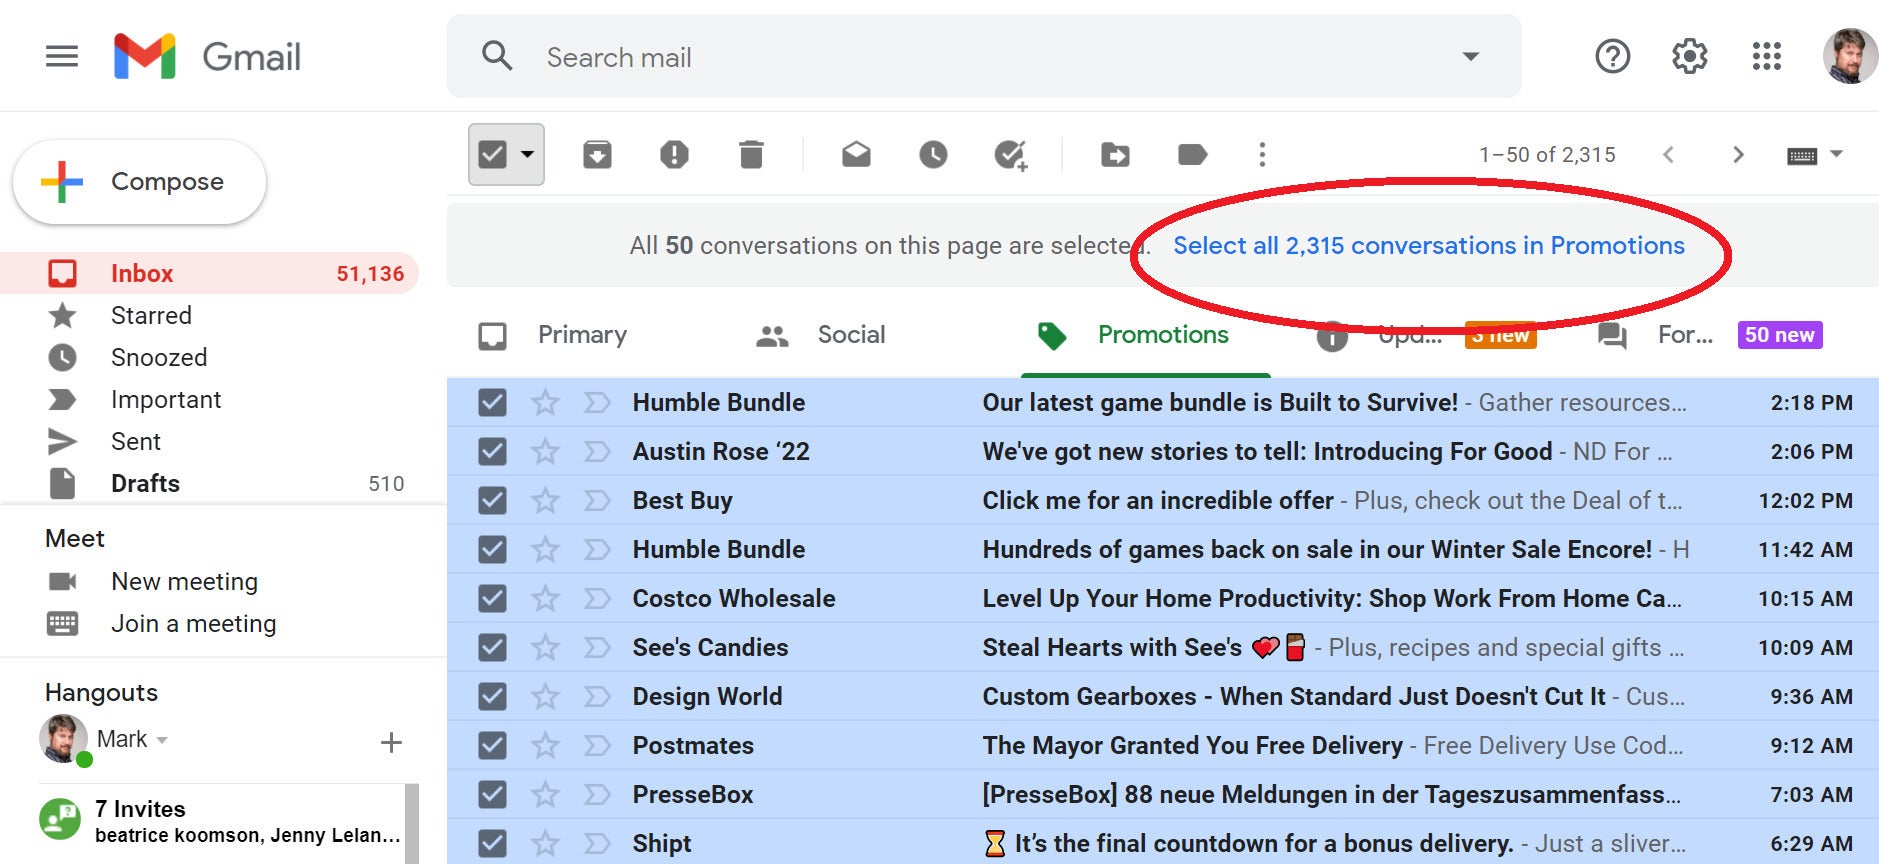 don have all mail in my gmail inbox